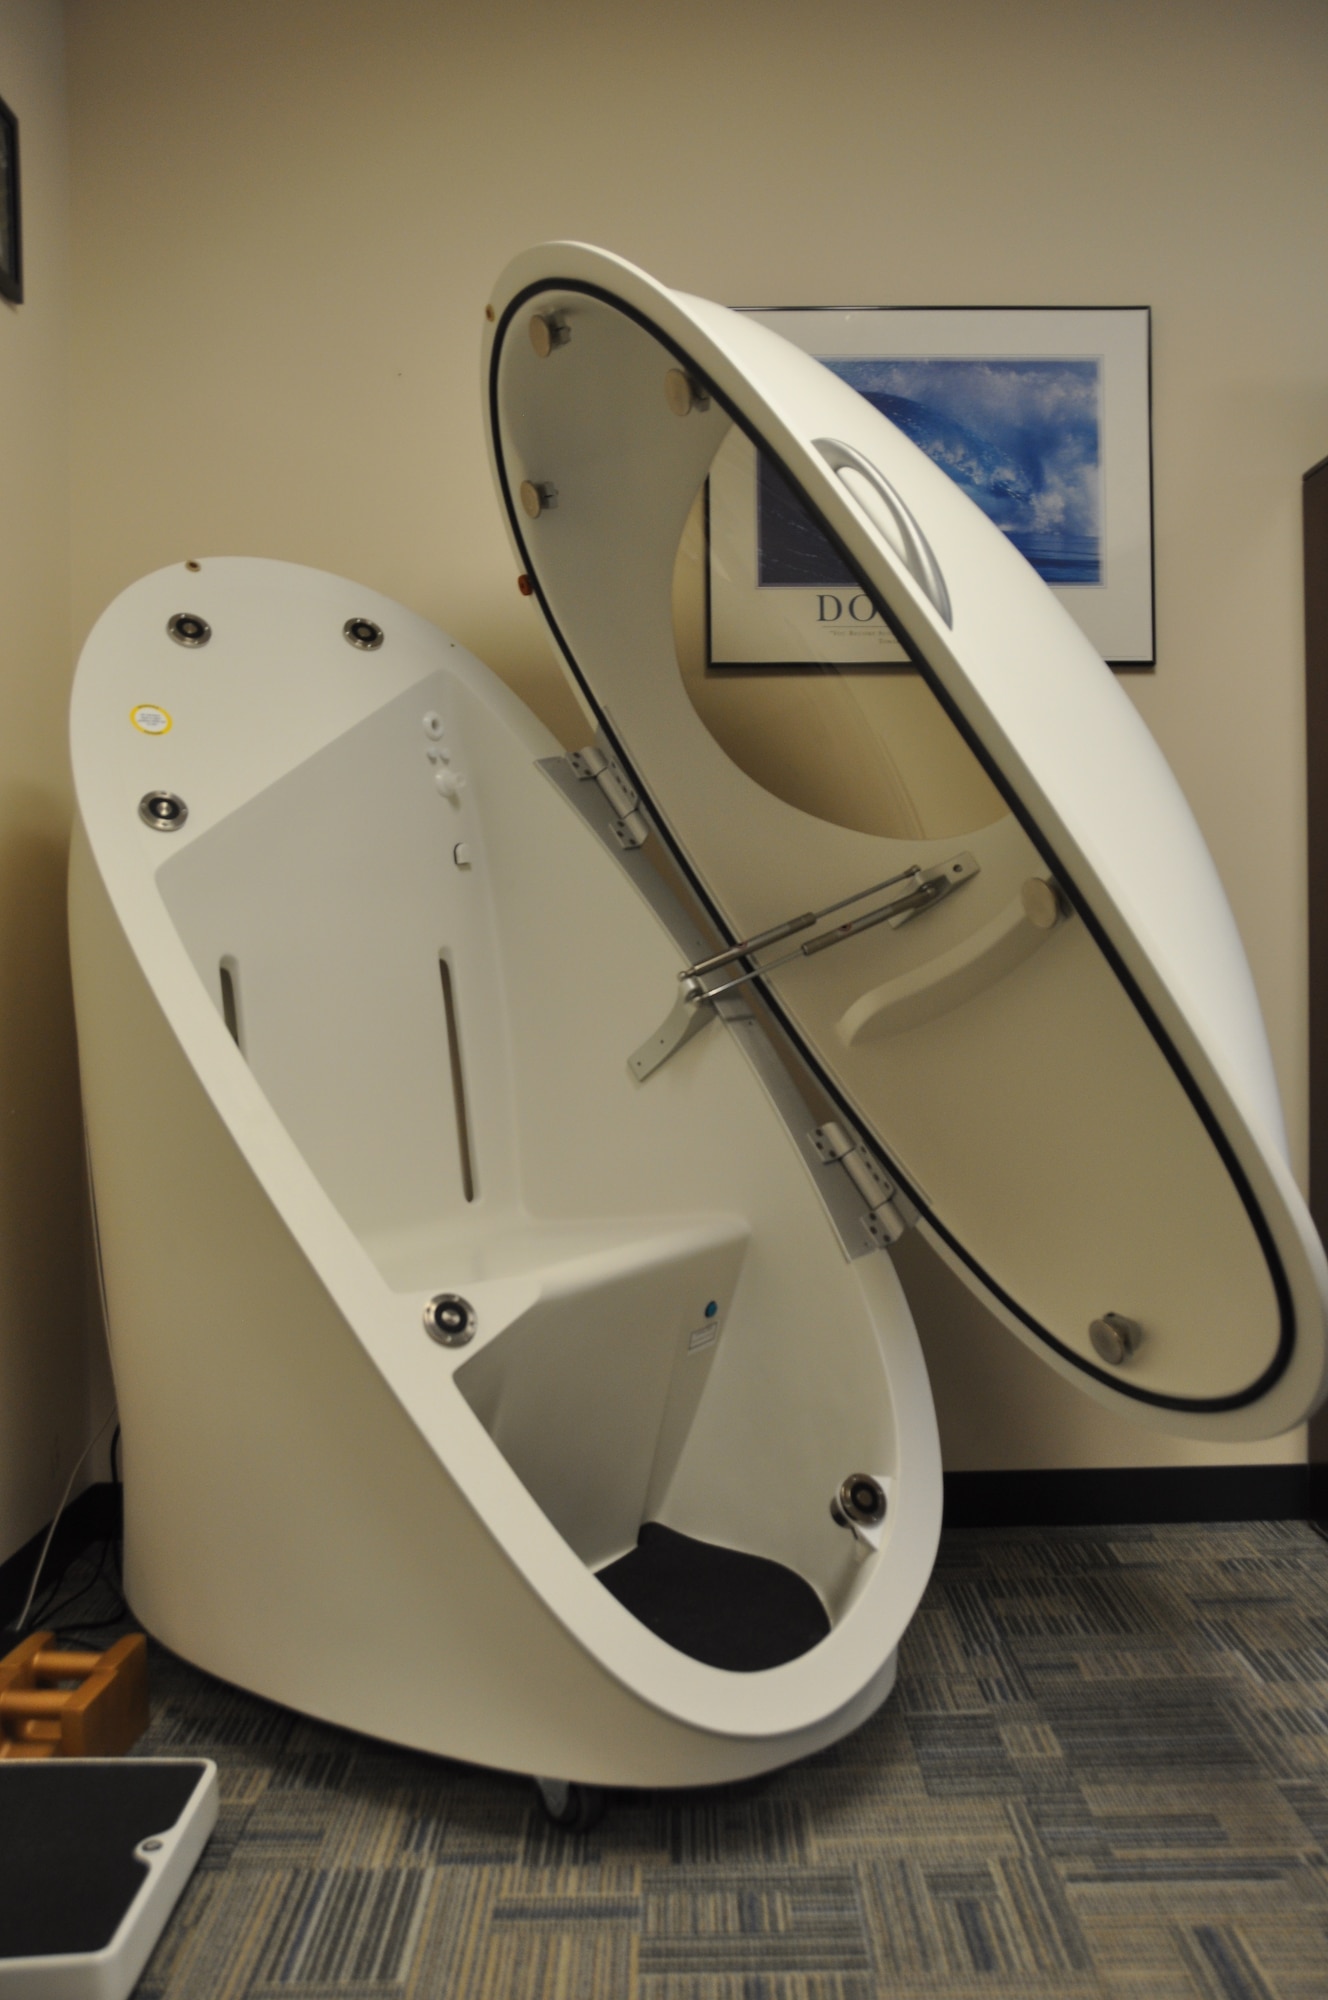 The Health and Wellness Center received the BOD POD, an air displacement tool that quickly and easily determines one’s percentage of body fat. (U.S. Air Force photo by Senior Airman Rachelle Elsea)